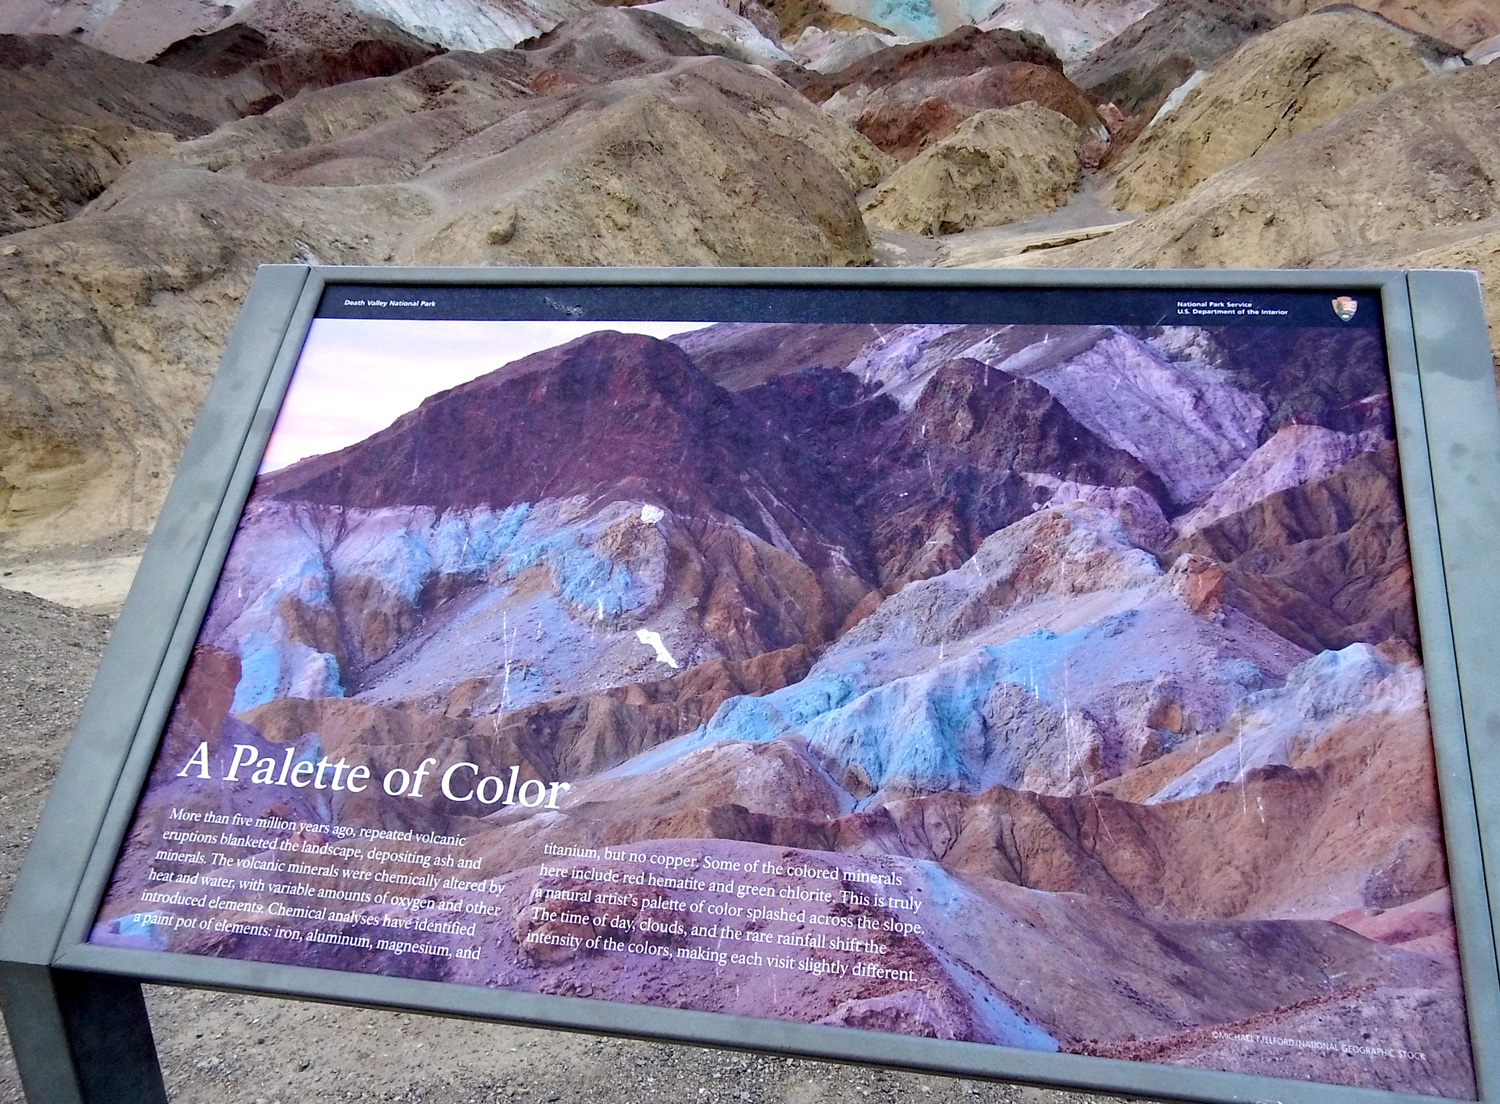 Sign explaining why the rocks are colored.